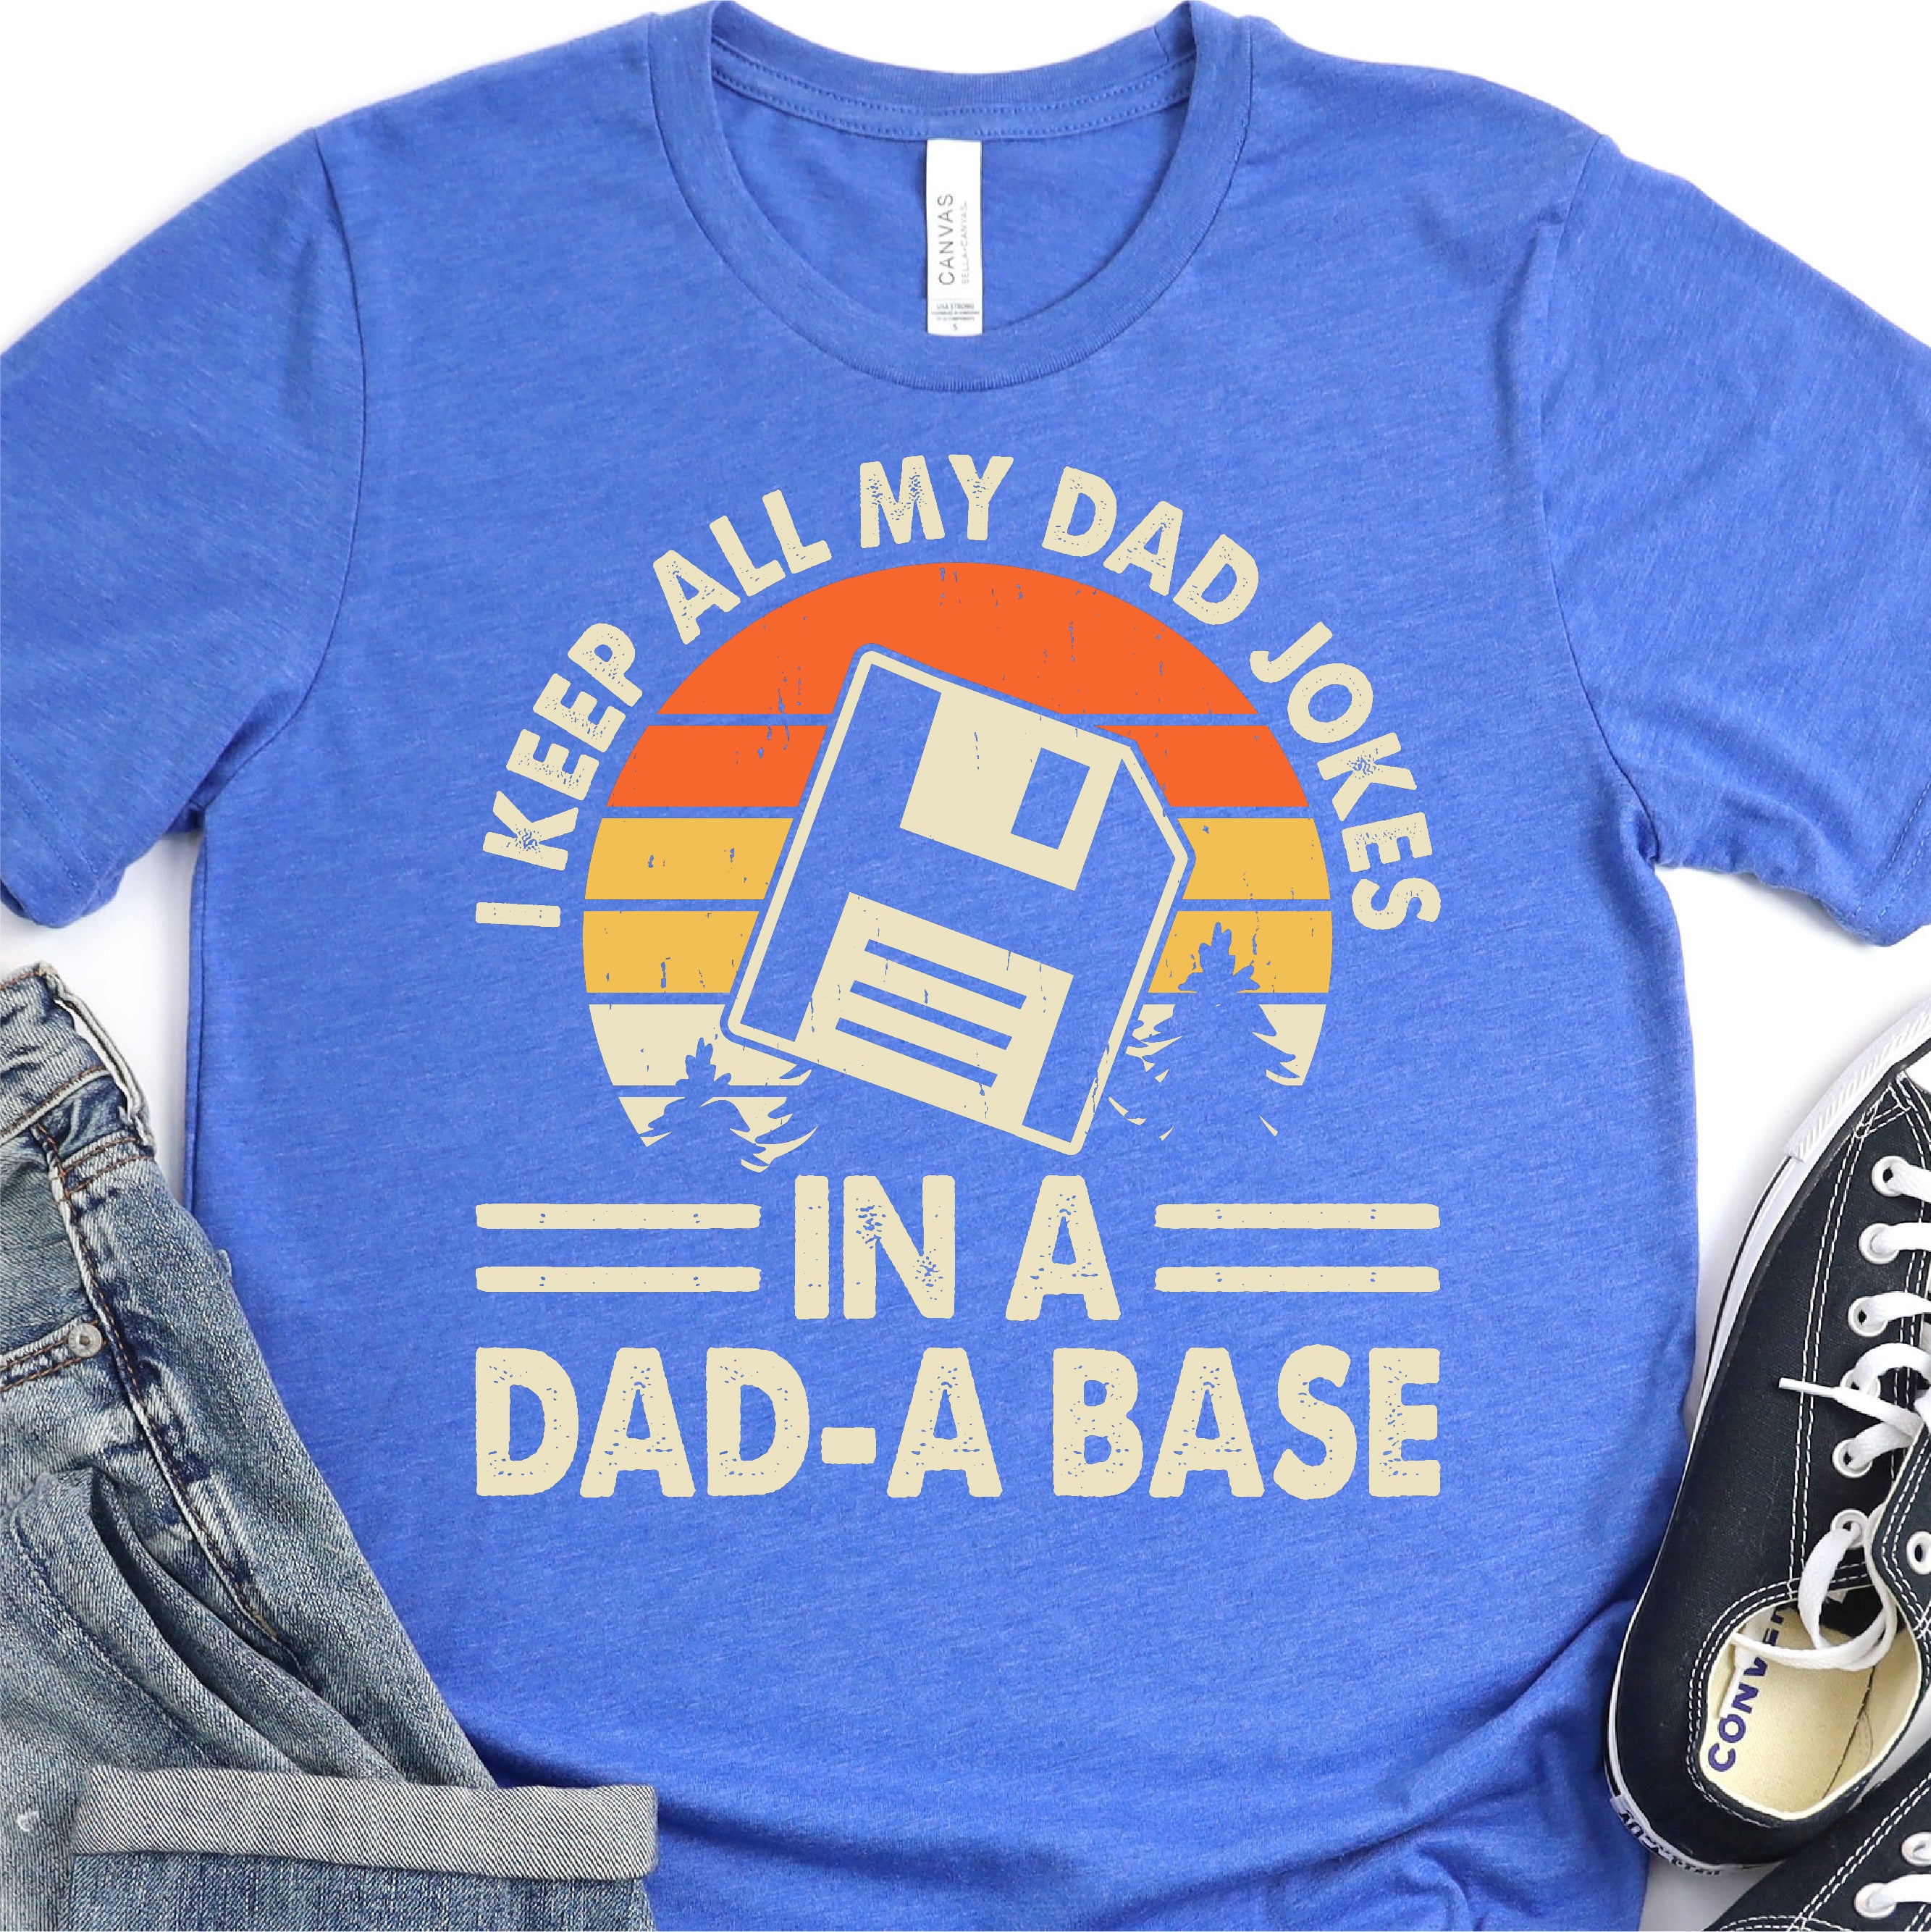 I Keep All My Dad Jokes In A Dad-A Base - Punny Shirts - Father's Day DTF Transfer - T-shirt Transfer For Dad Nashville Design House